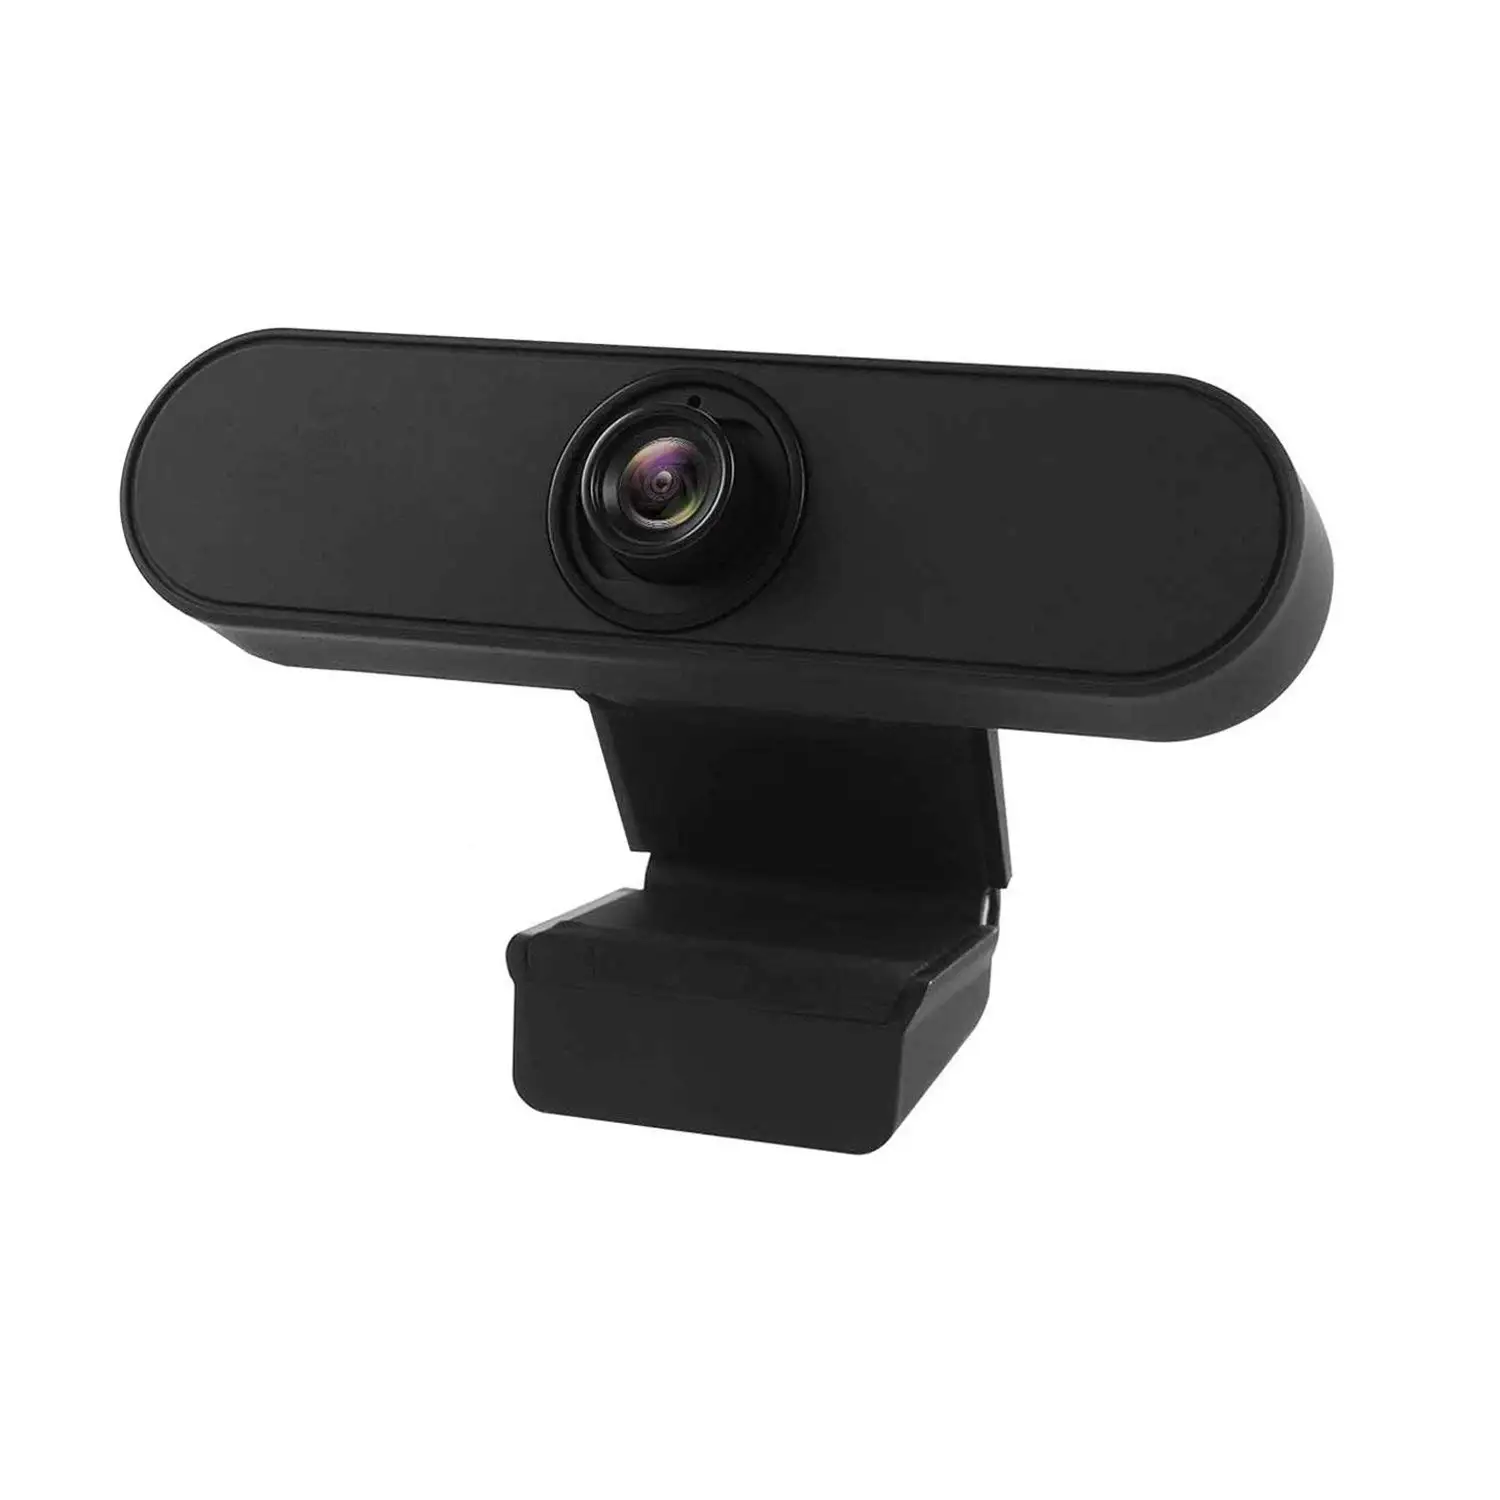 Buy Hd Webcam Jelly Comb 1080p Usb Computer Webcam With Built In 